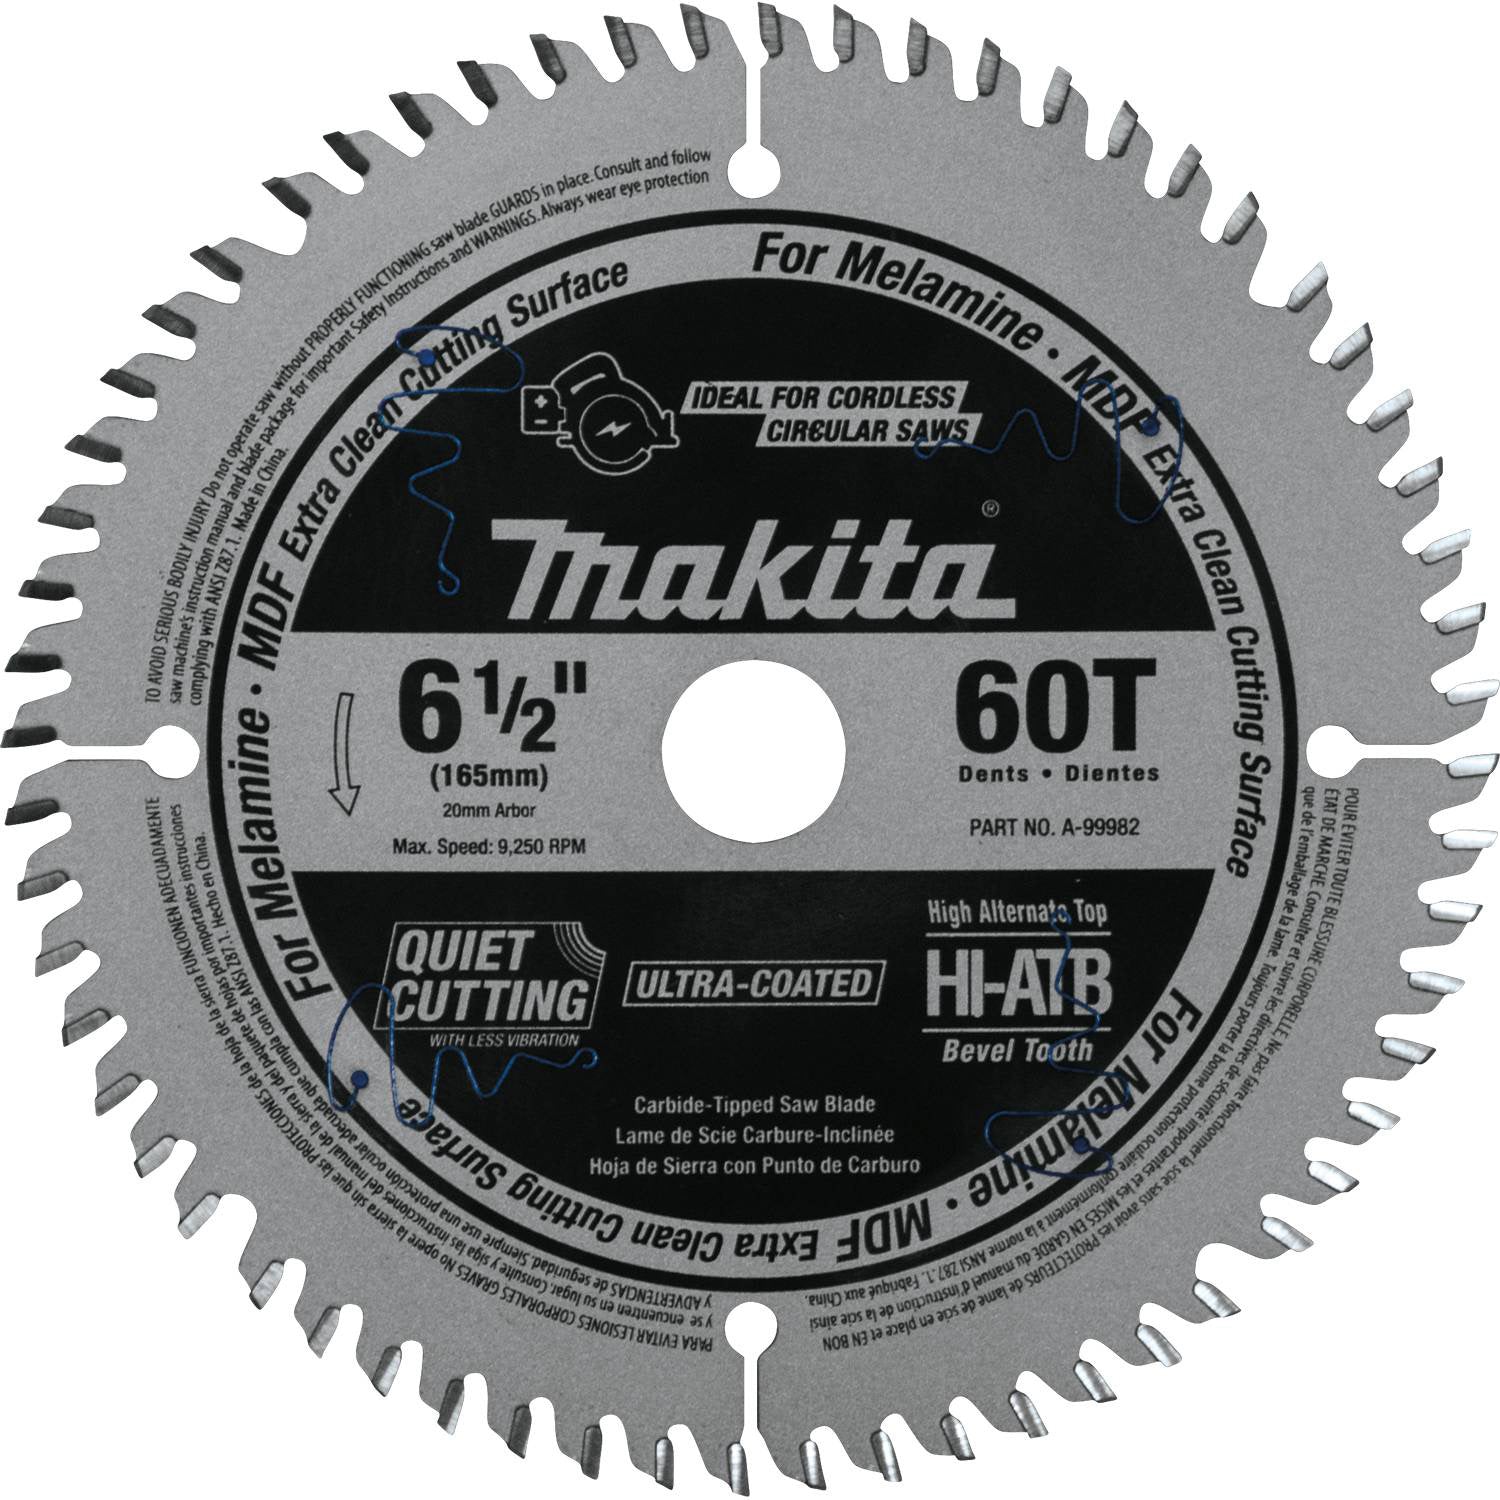 6‑1/2" 60T 22mm Arbor (ATB) Carbide‑Tipped Cordless Plunge Saw Blade